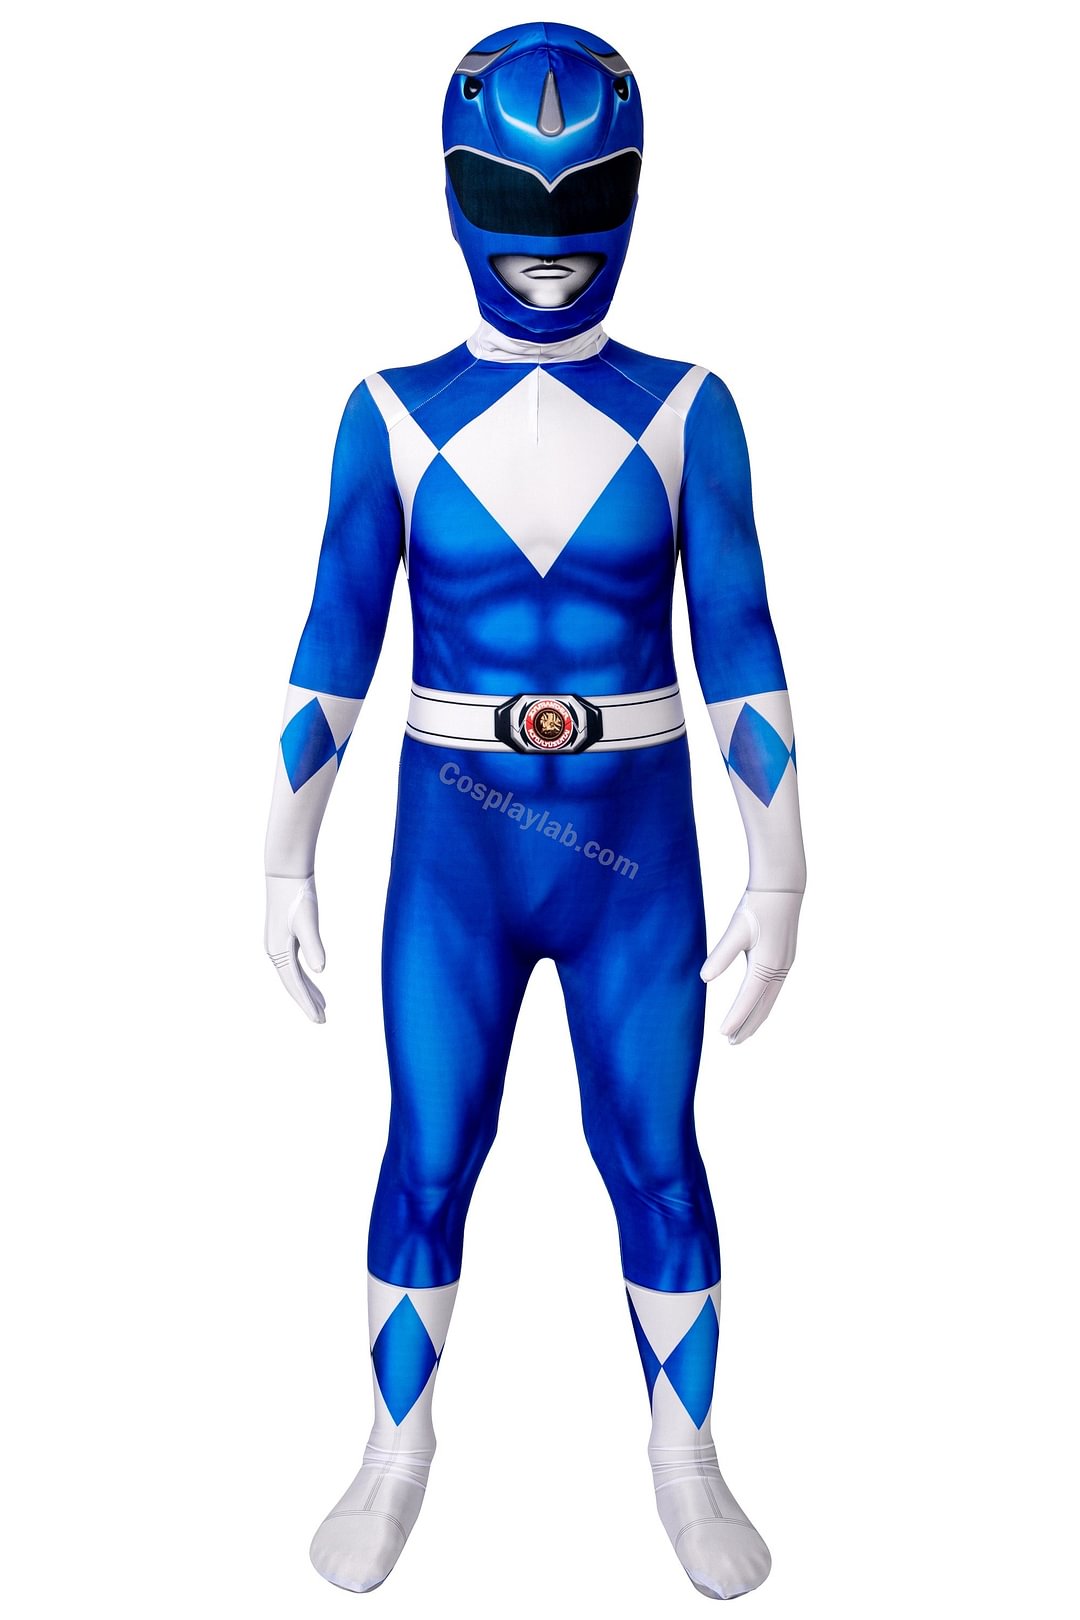 Kids Blue Ranger Cosplay Suit 3D Spandex Costume Halloween Gifts for Children By CosplayLab